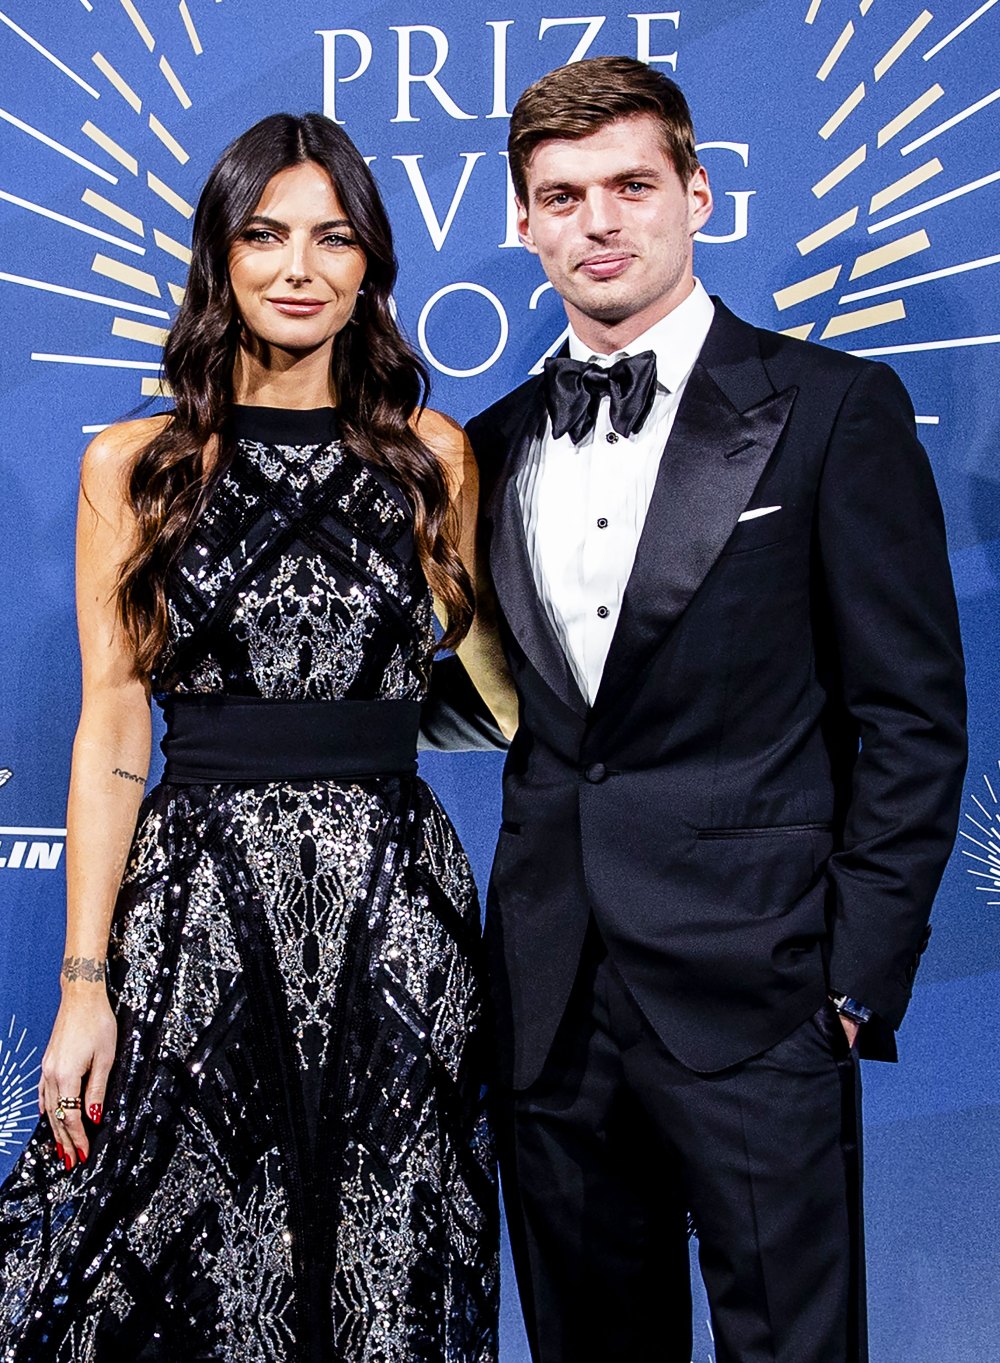 Formula 1 Driver Max Verstappen and Girlfriend Kelly Piquet's Relationship Timeline black bow tie